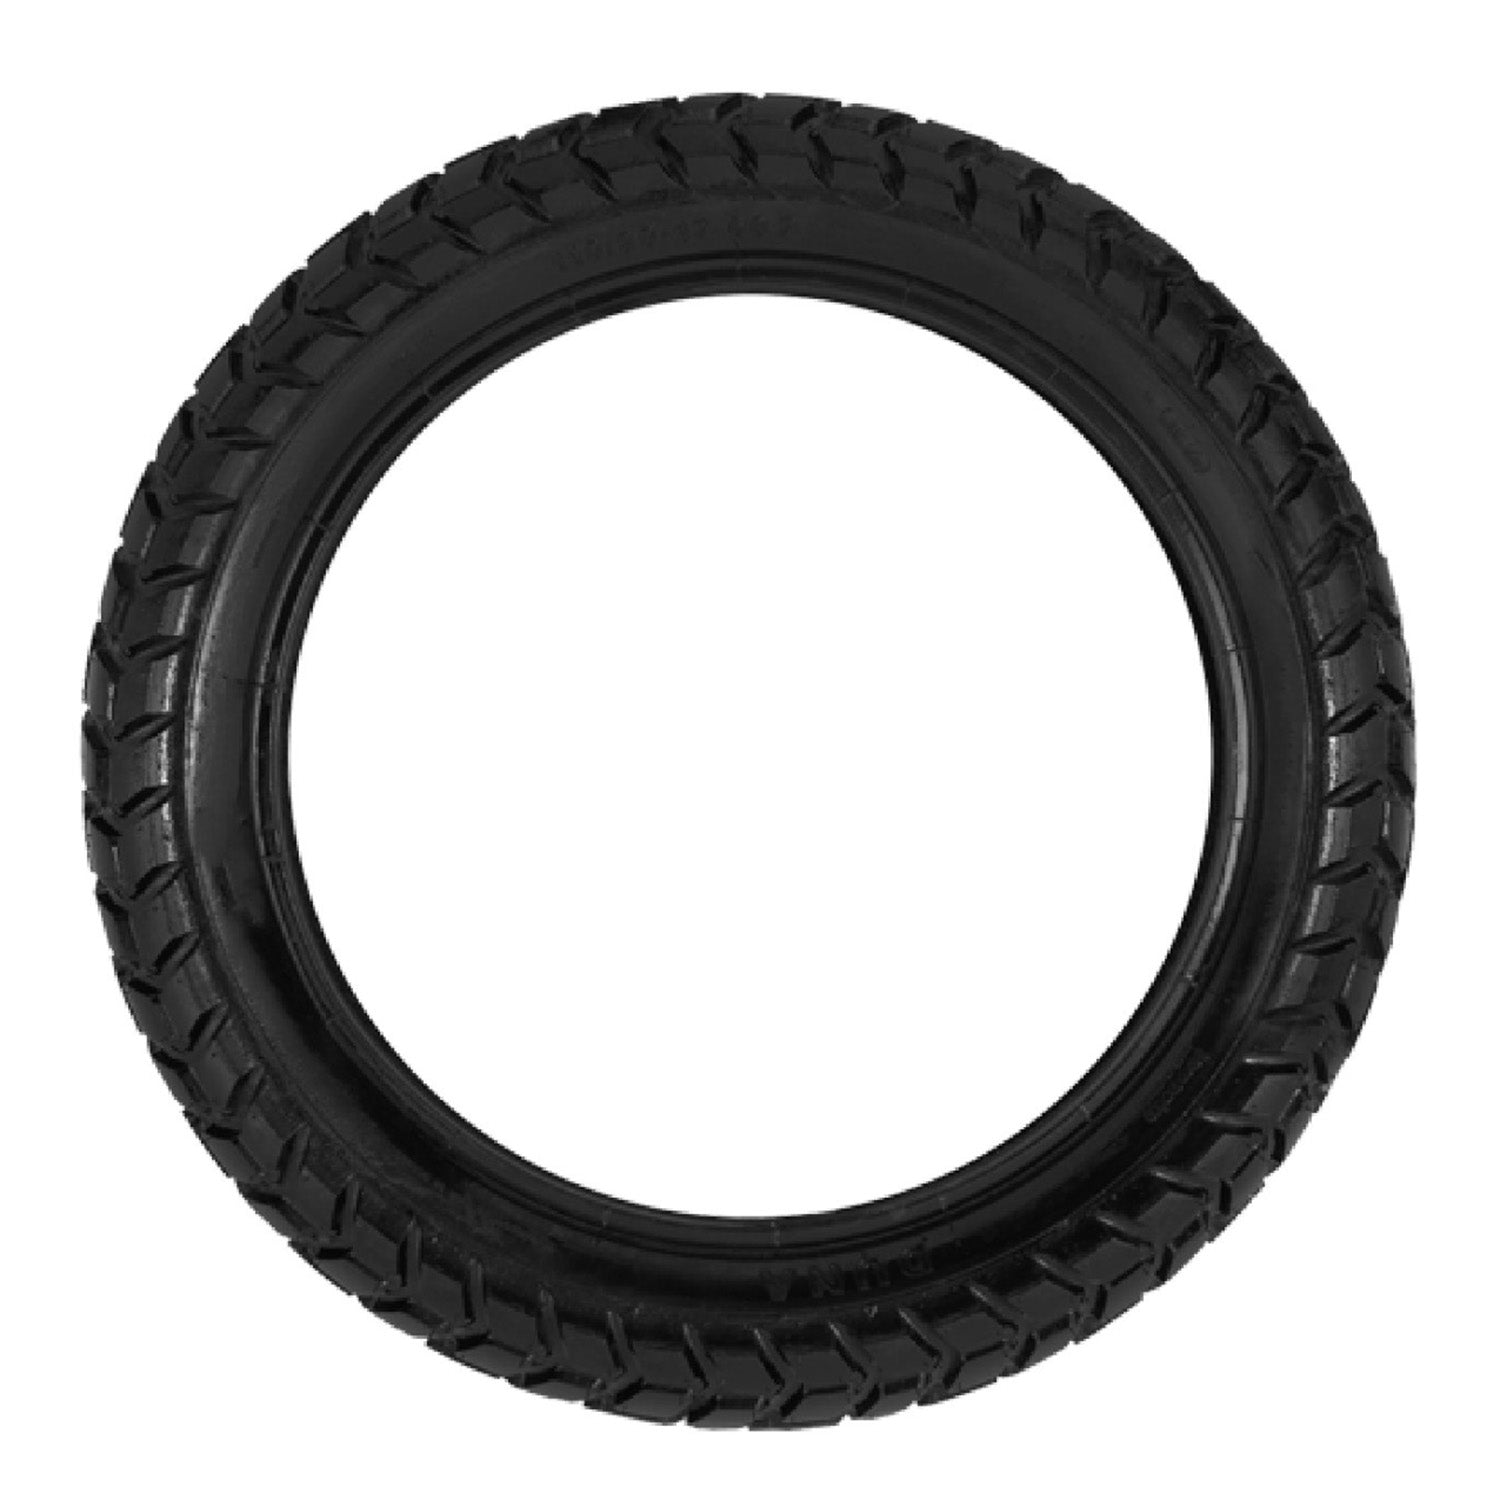 GLDYTIMES 50/75-6.1 Scooter Tire: 50/75-6.1 Solid Tires Replacement for  Gotrax GXL V2 Apex XL XR Ultra Elite Hiboy S2 S2R Plus AOVOPRO Hover-1  Journey